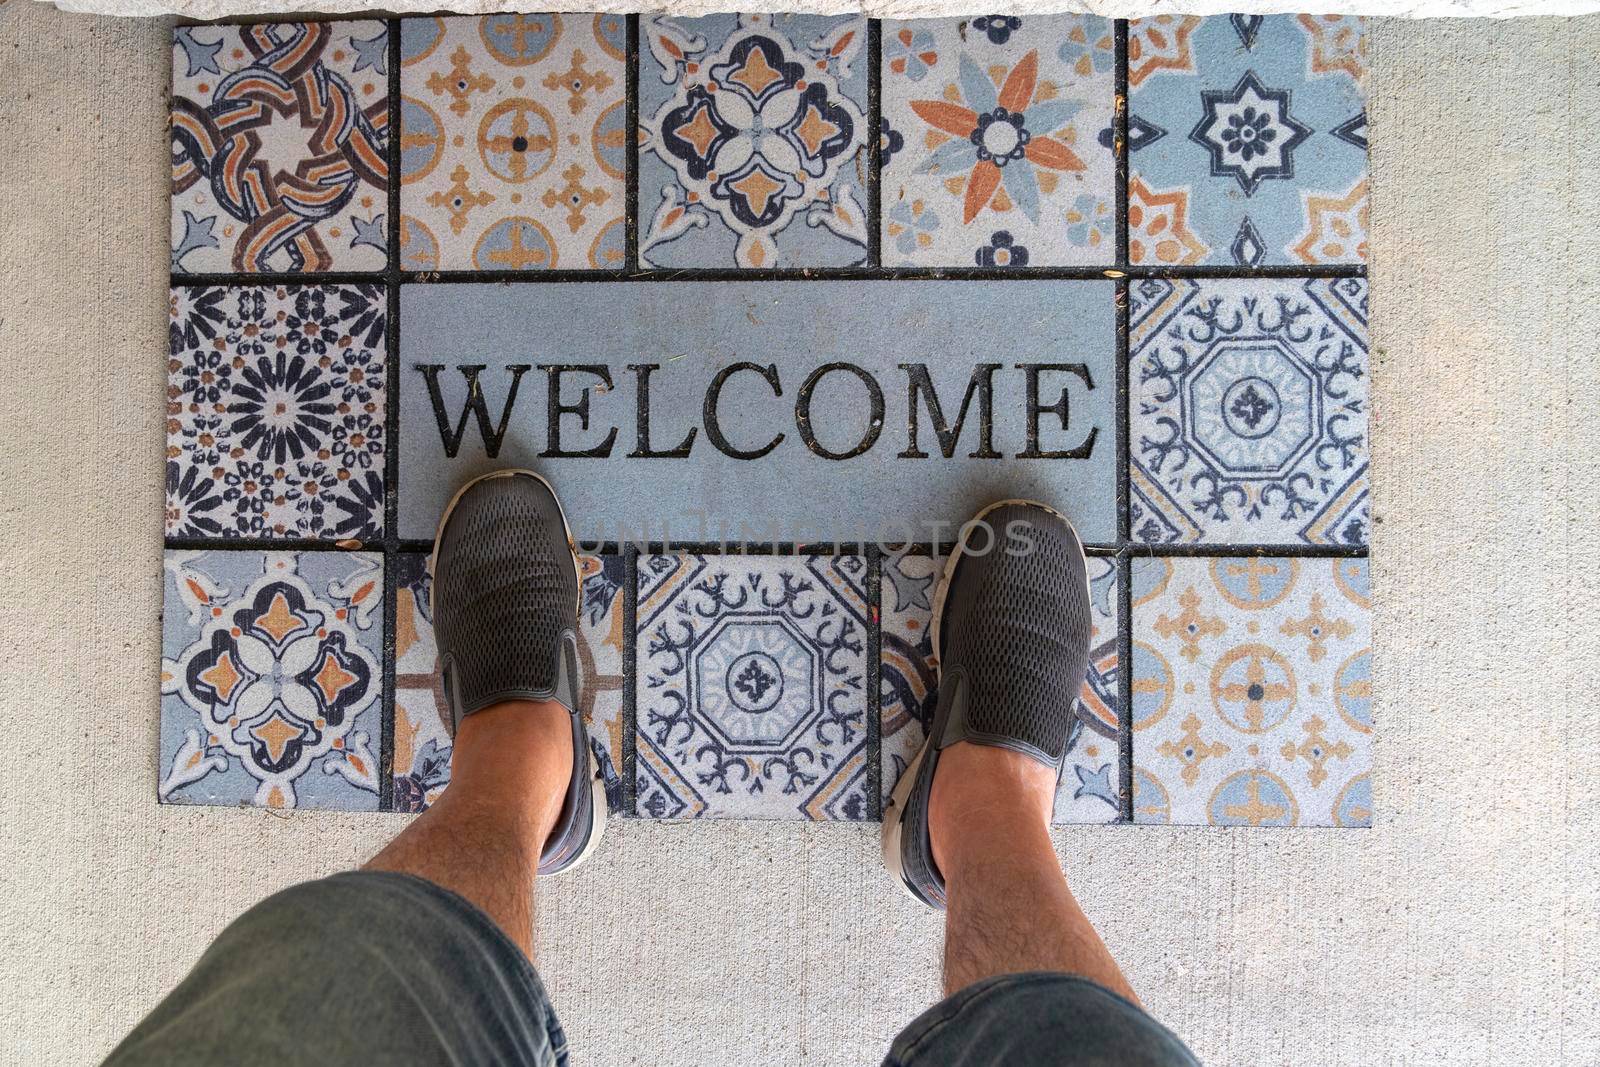 In front of the entrance to the house on the rug the feet of a person standing in front